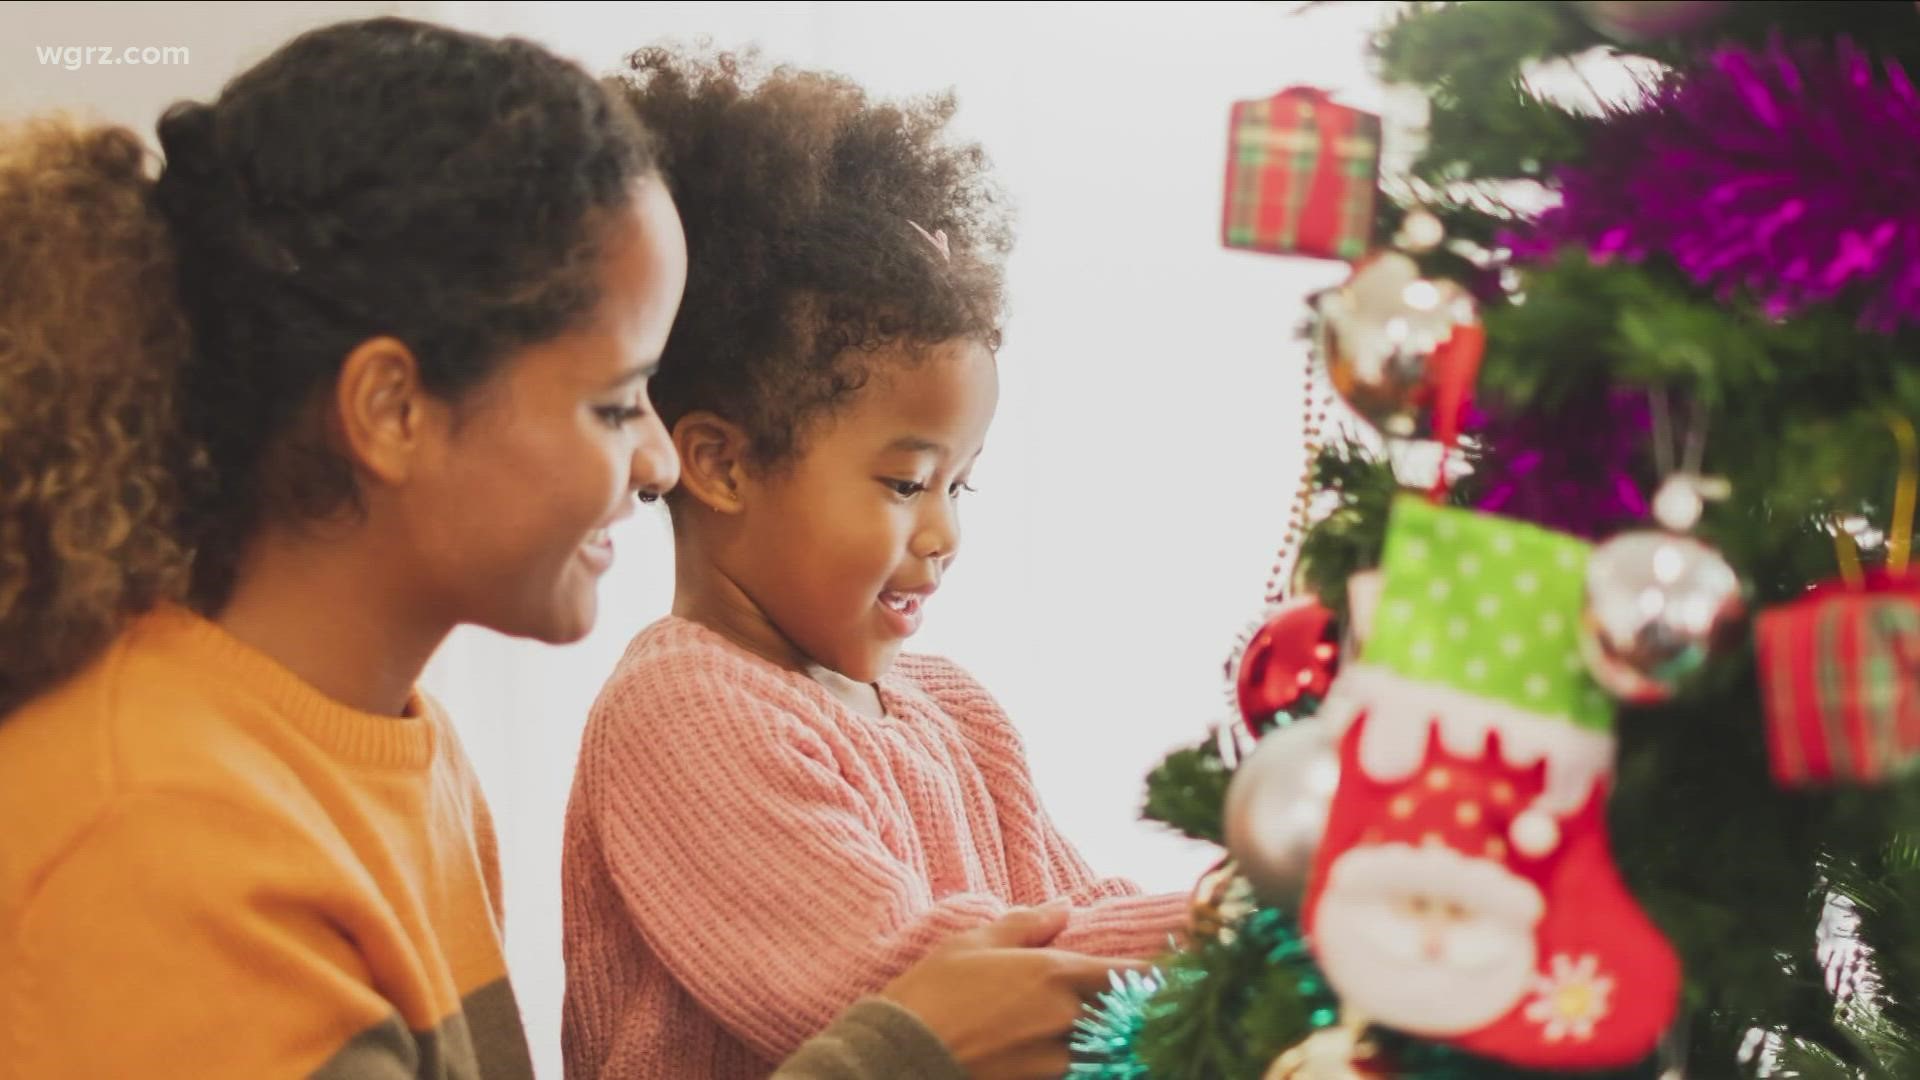 The holidays can be stressful especially for those who have lost someone during the pandemic. What you can do to help with mental health stress this holiday season.